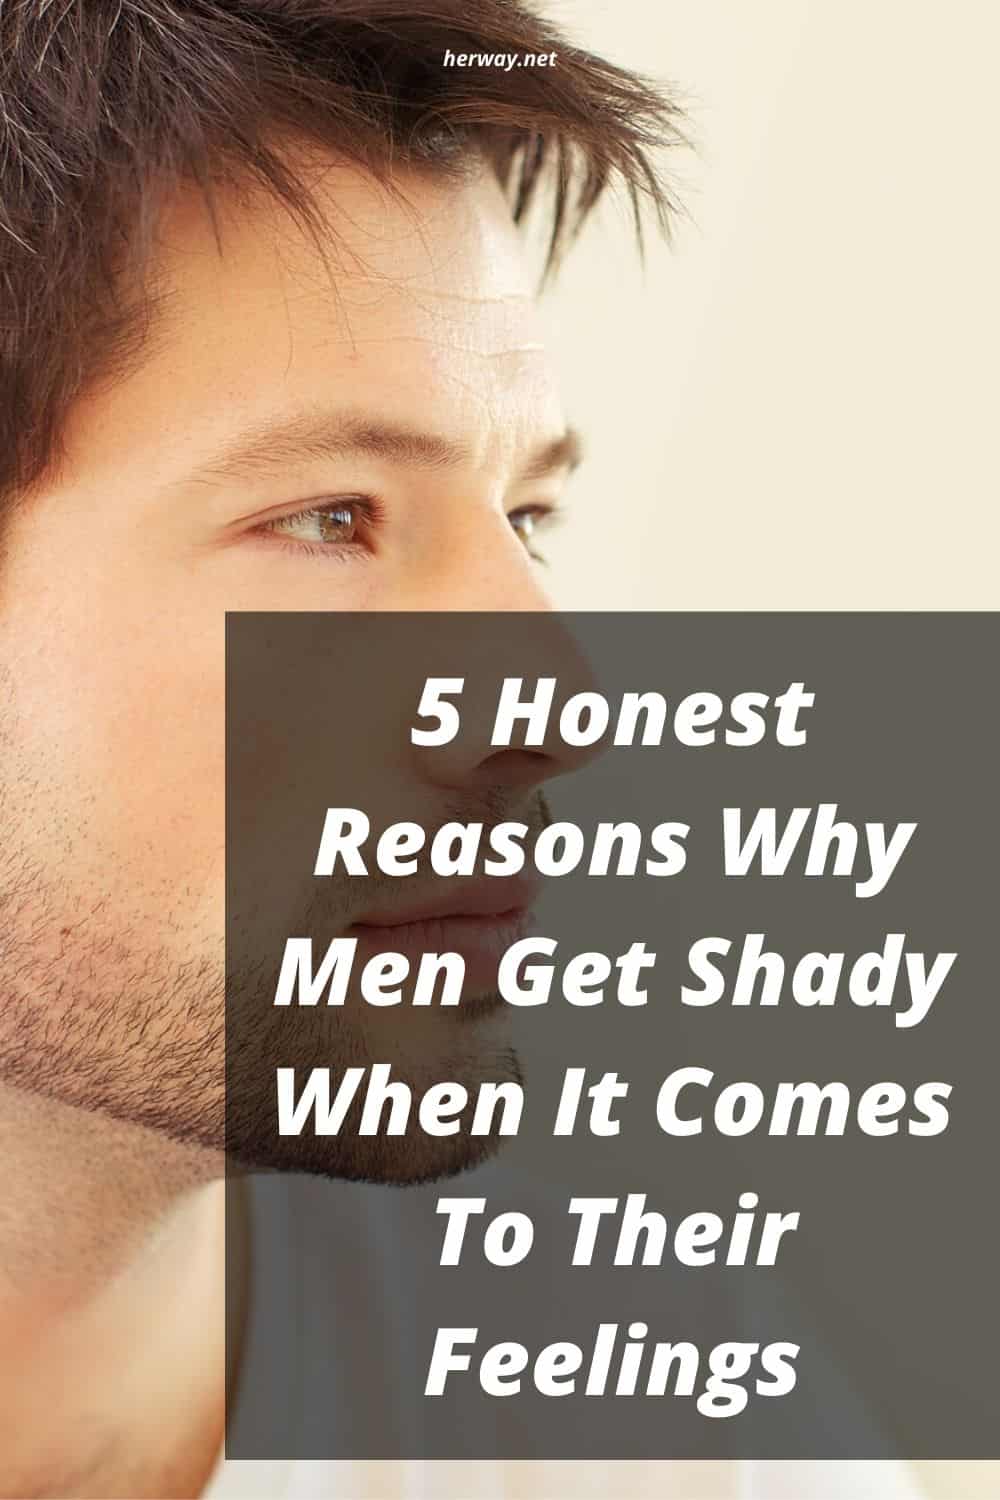 5 Honest Reasons Why Men Get Shady When It Comes To Their Feelings